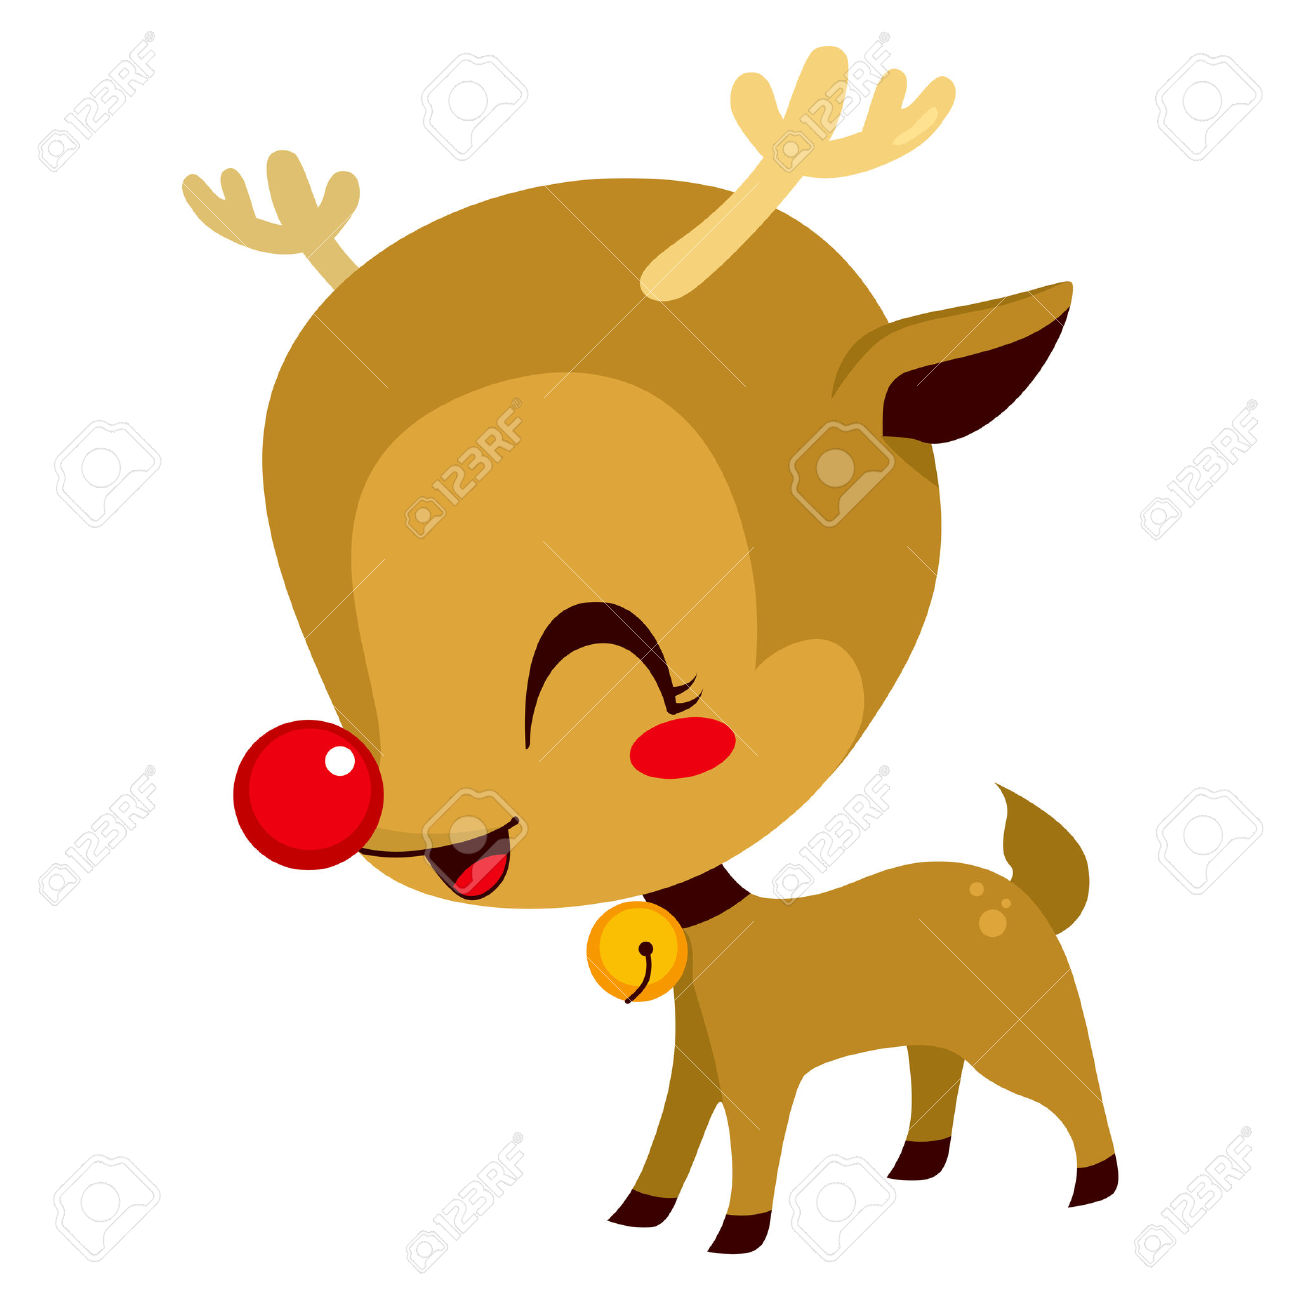 rudolph the red nose reindeer: .